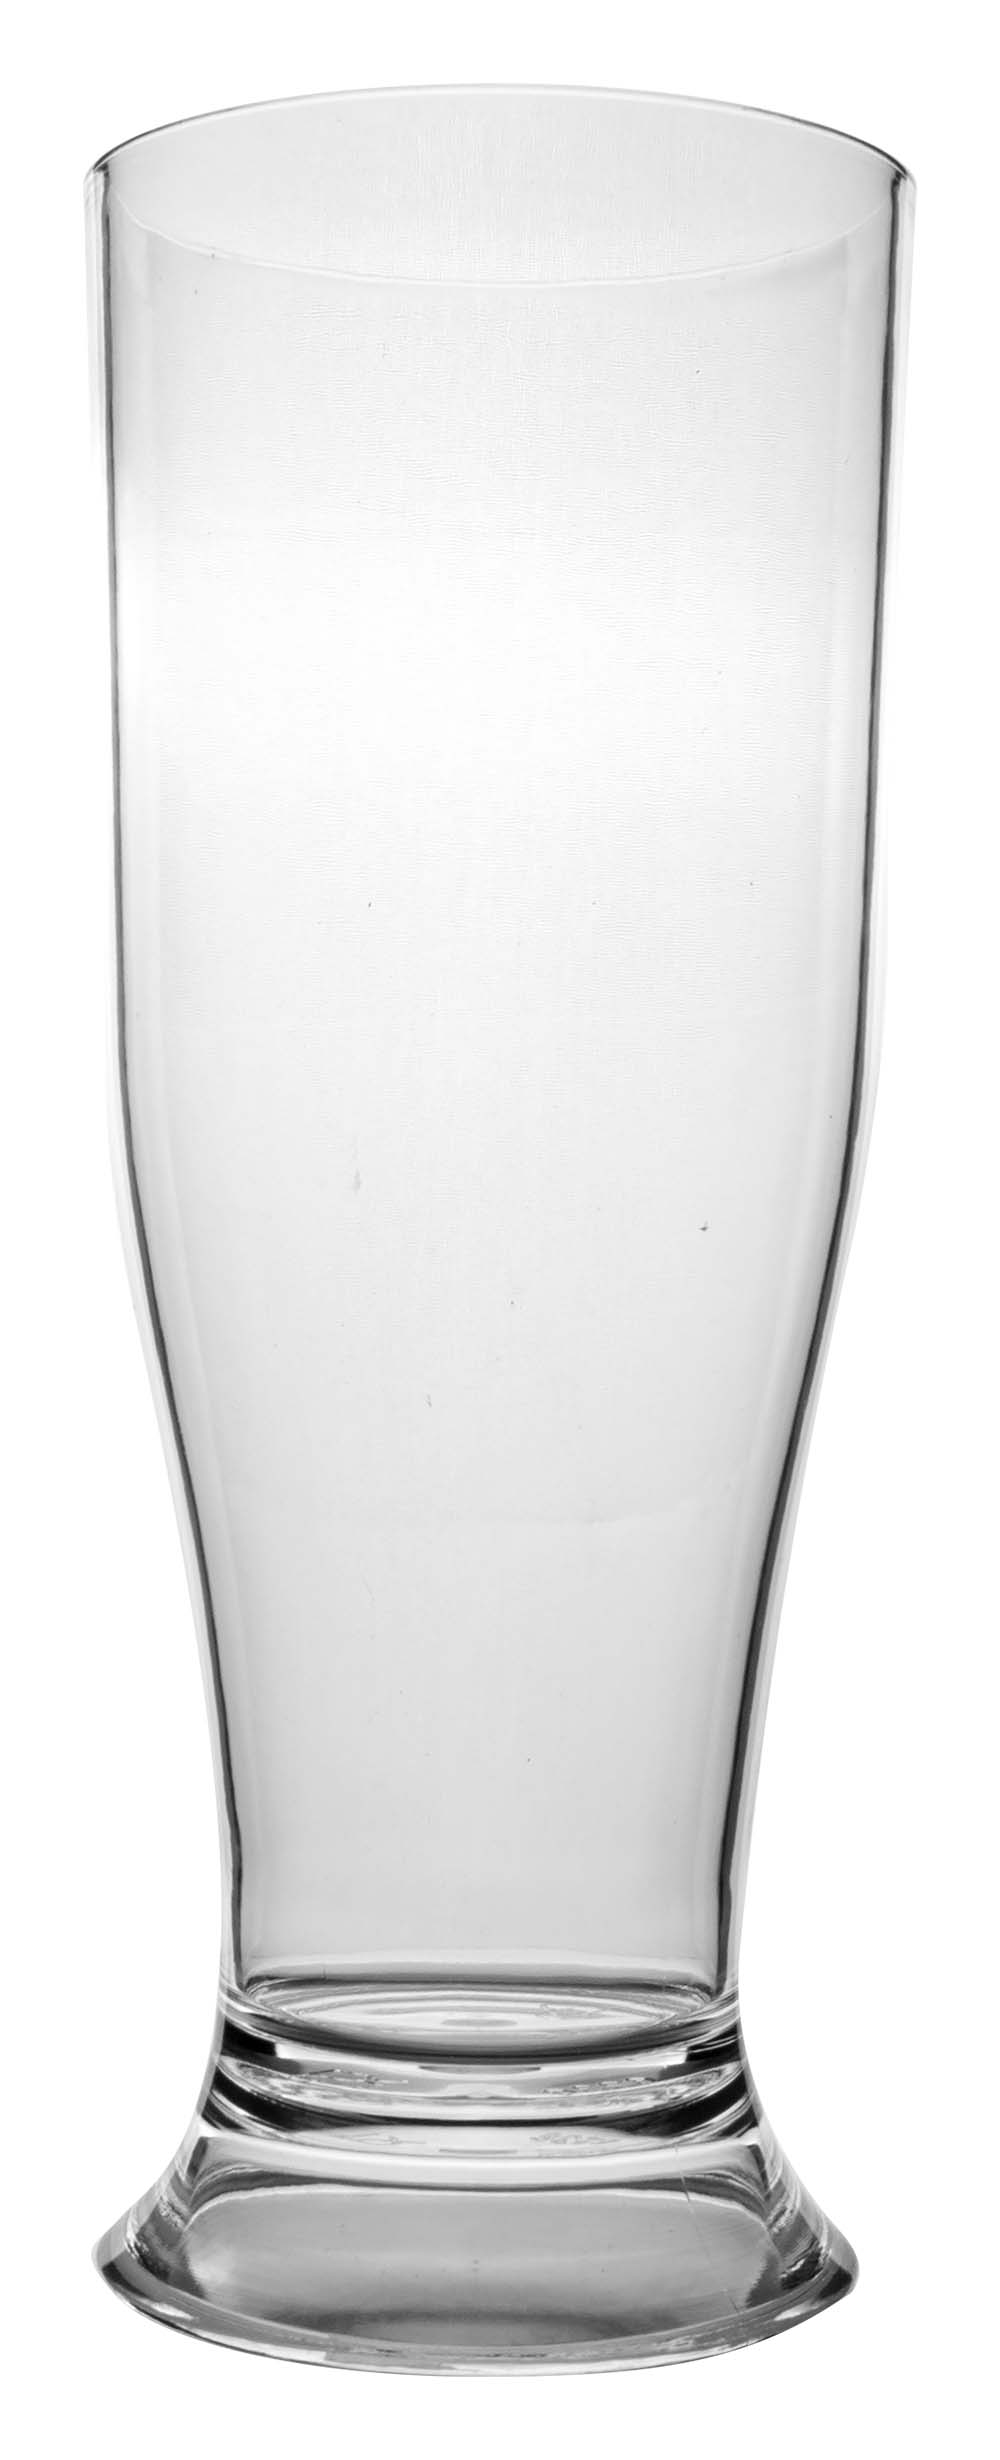 6101494 An extra sturdy beer glass. Made of 100% polycarbonate This makes the glasses almost unbreakable, light weight and scratch proof. This glass is also dishwasher safe.